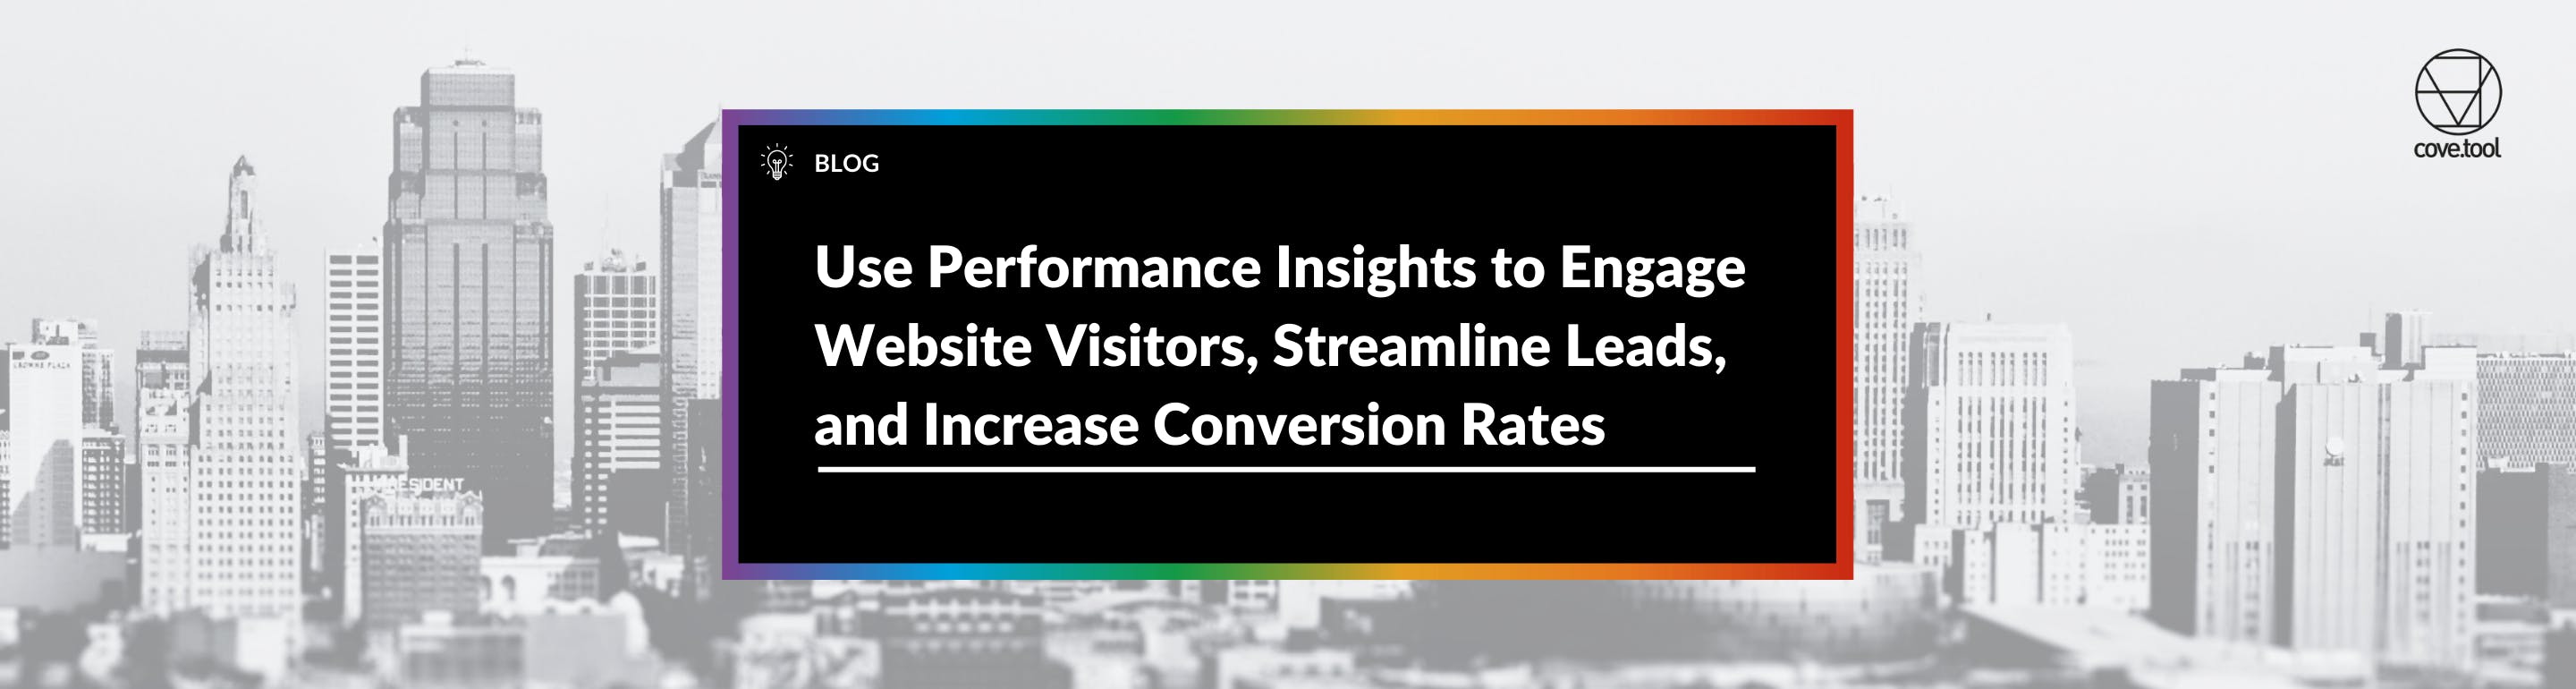 revgen.tool marketing app using performance insights to engage, streamline and convert leads